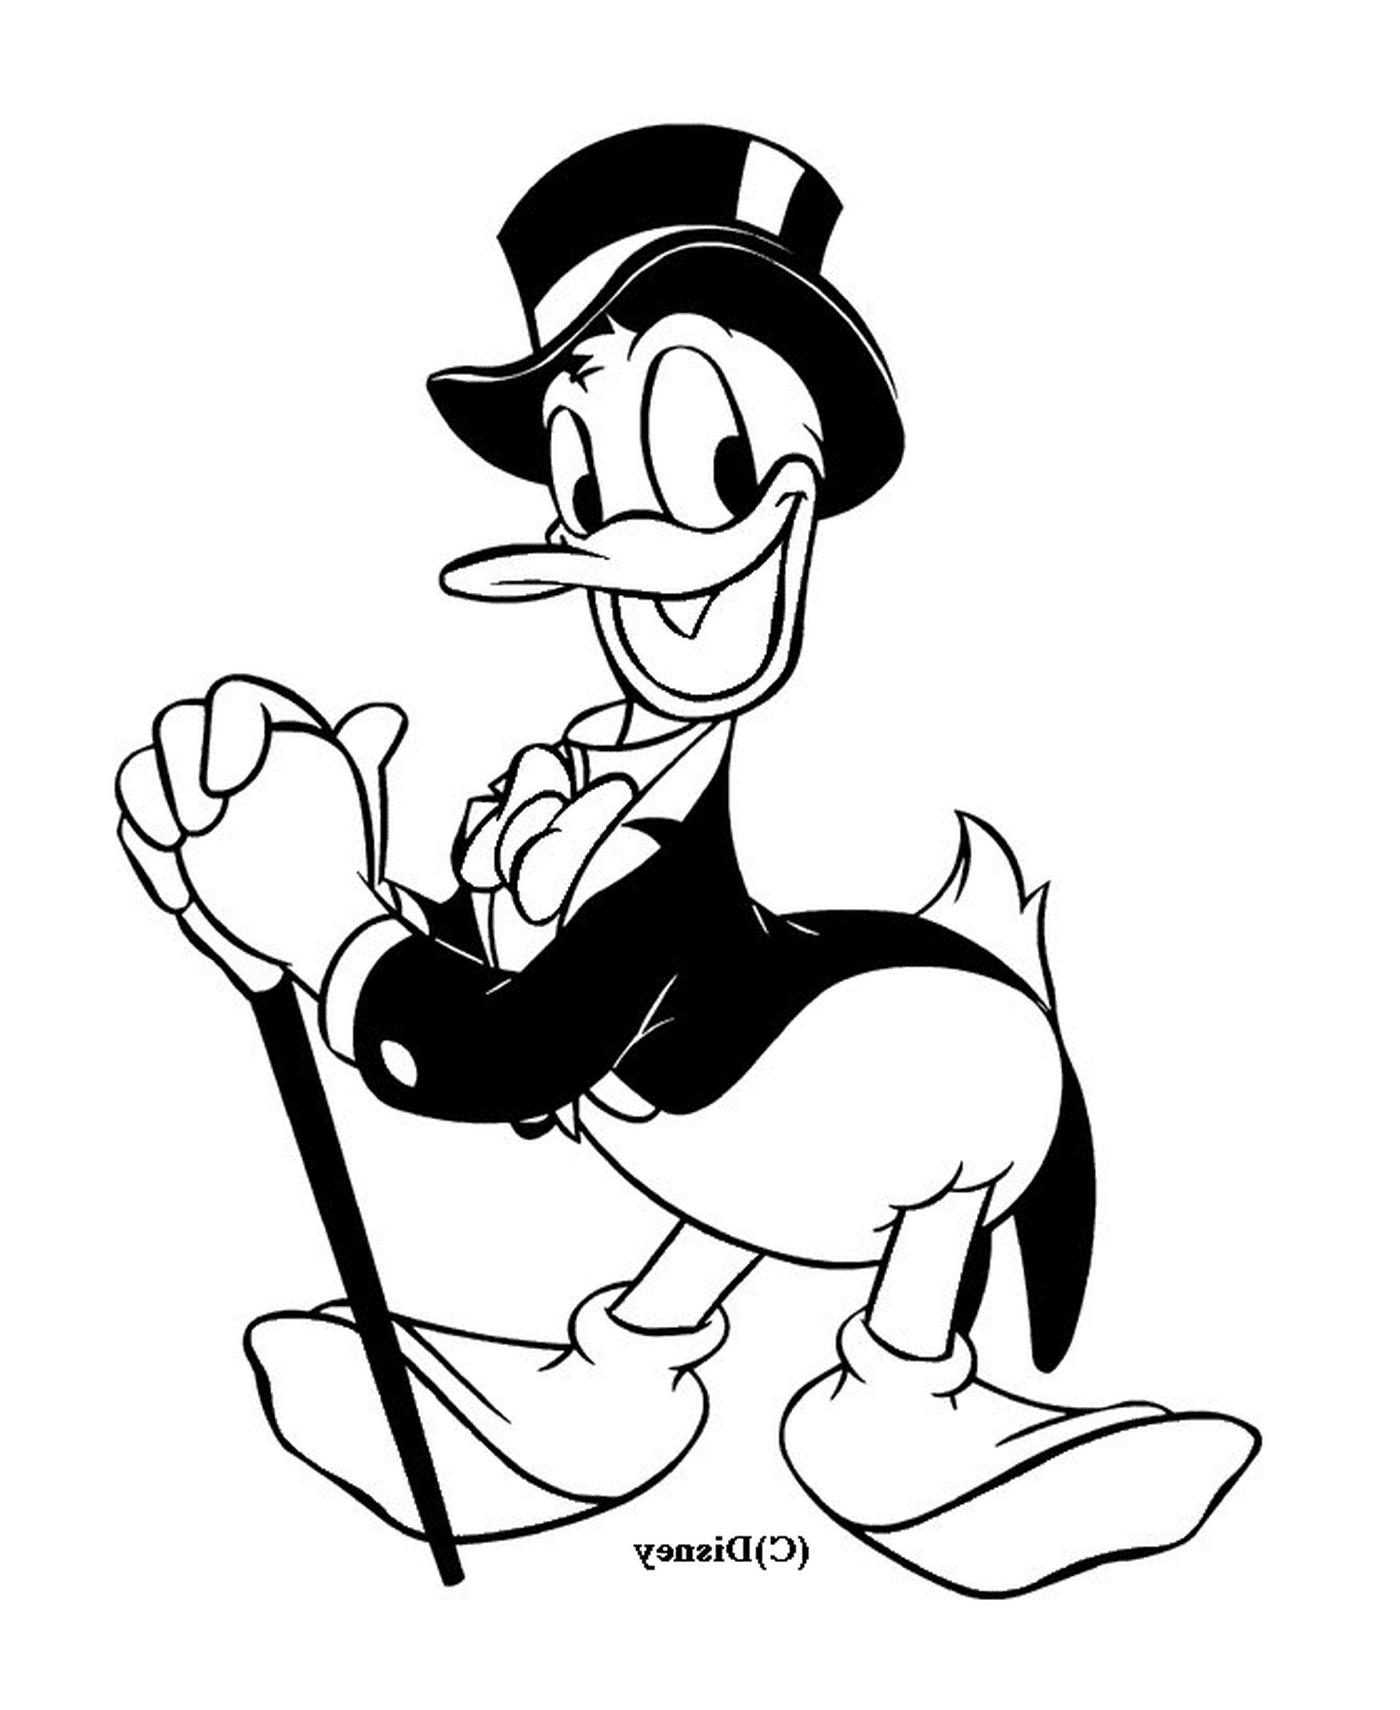  Donald in tuxedo with class 